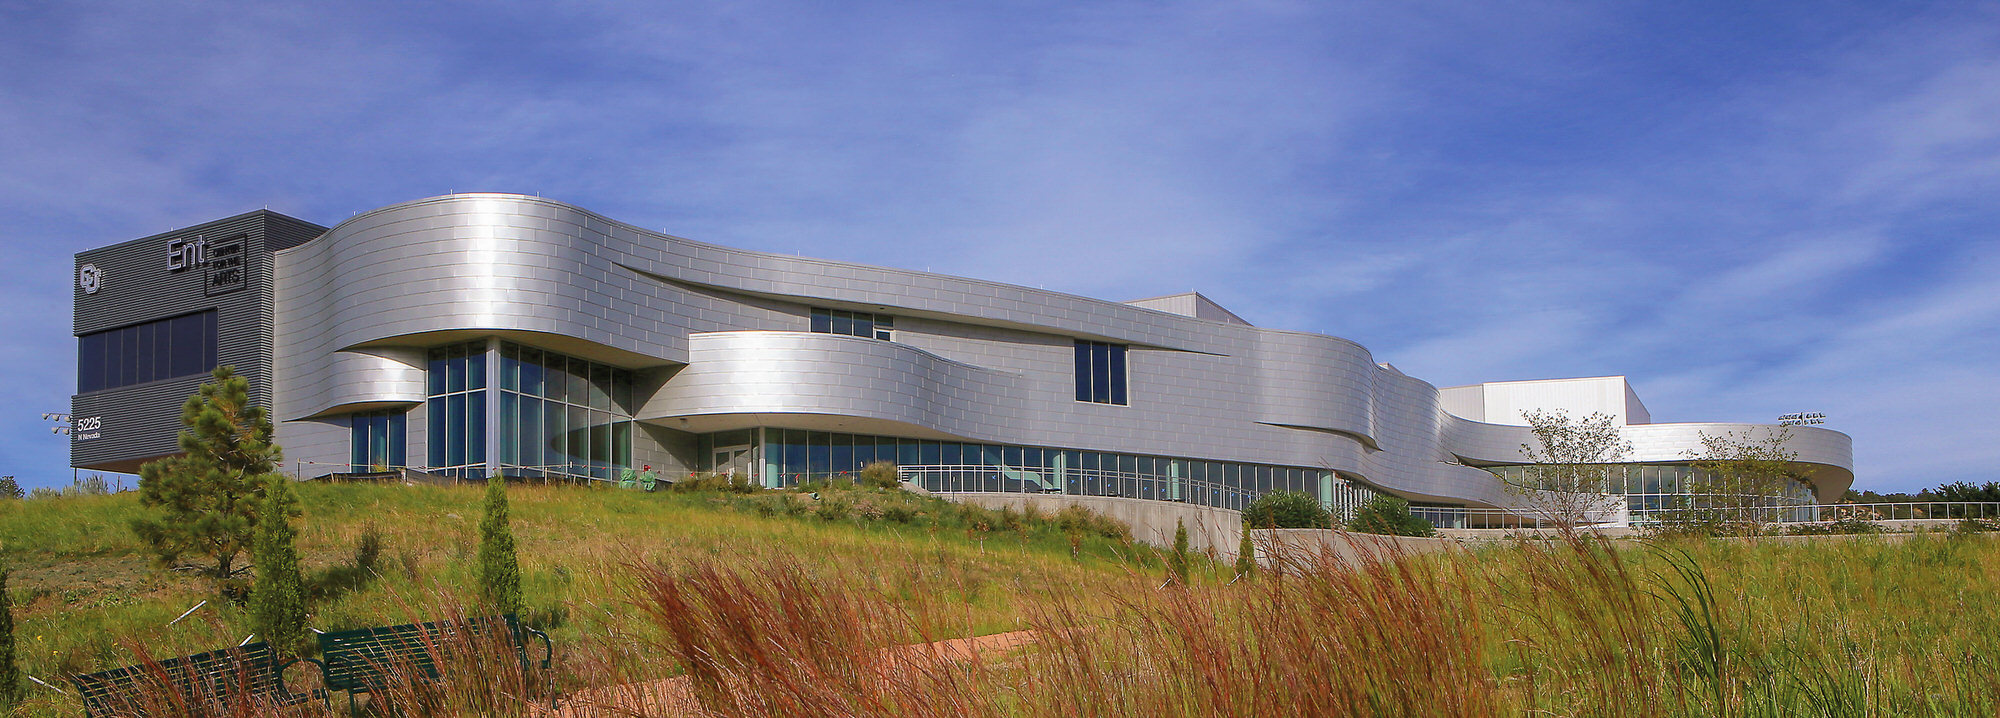 The Ent Center for the Arts (Image via UCCS)